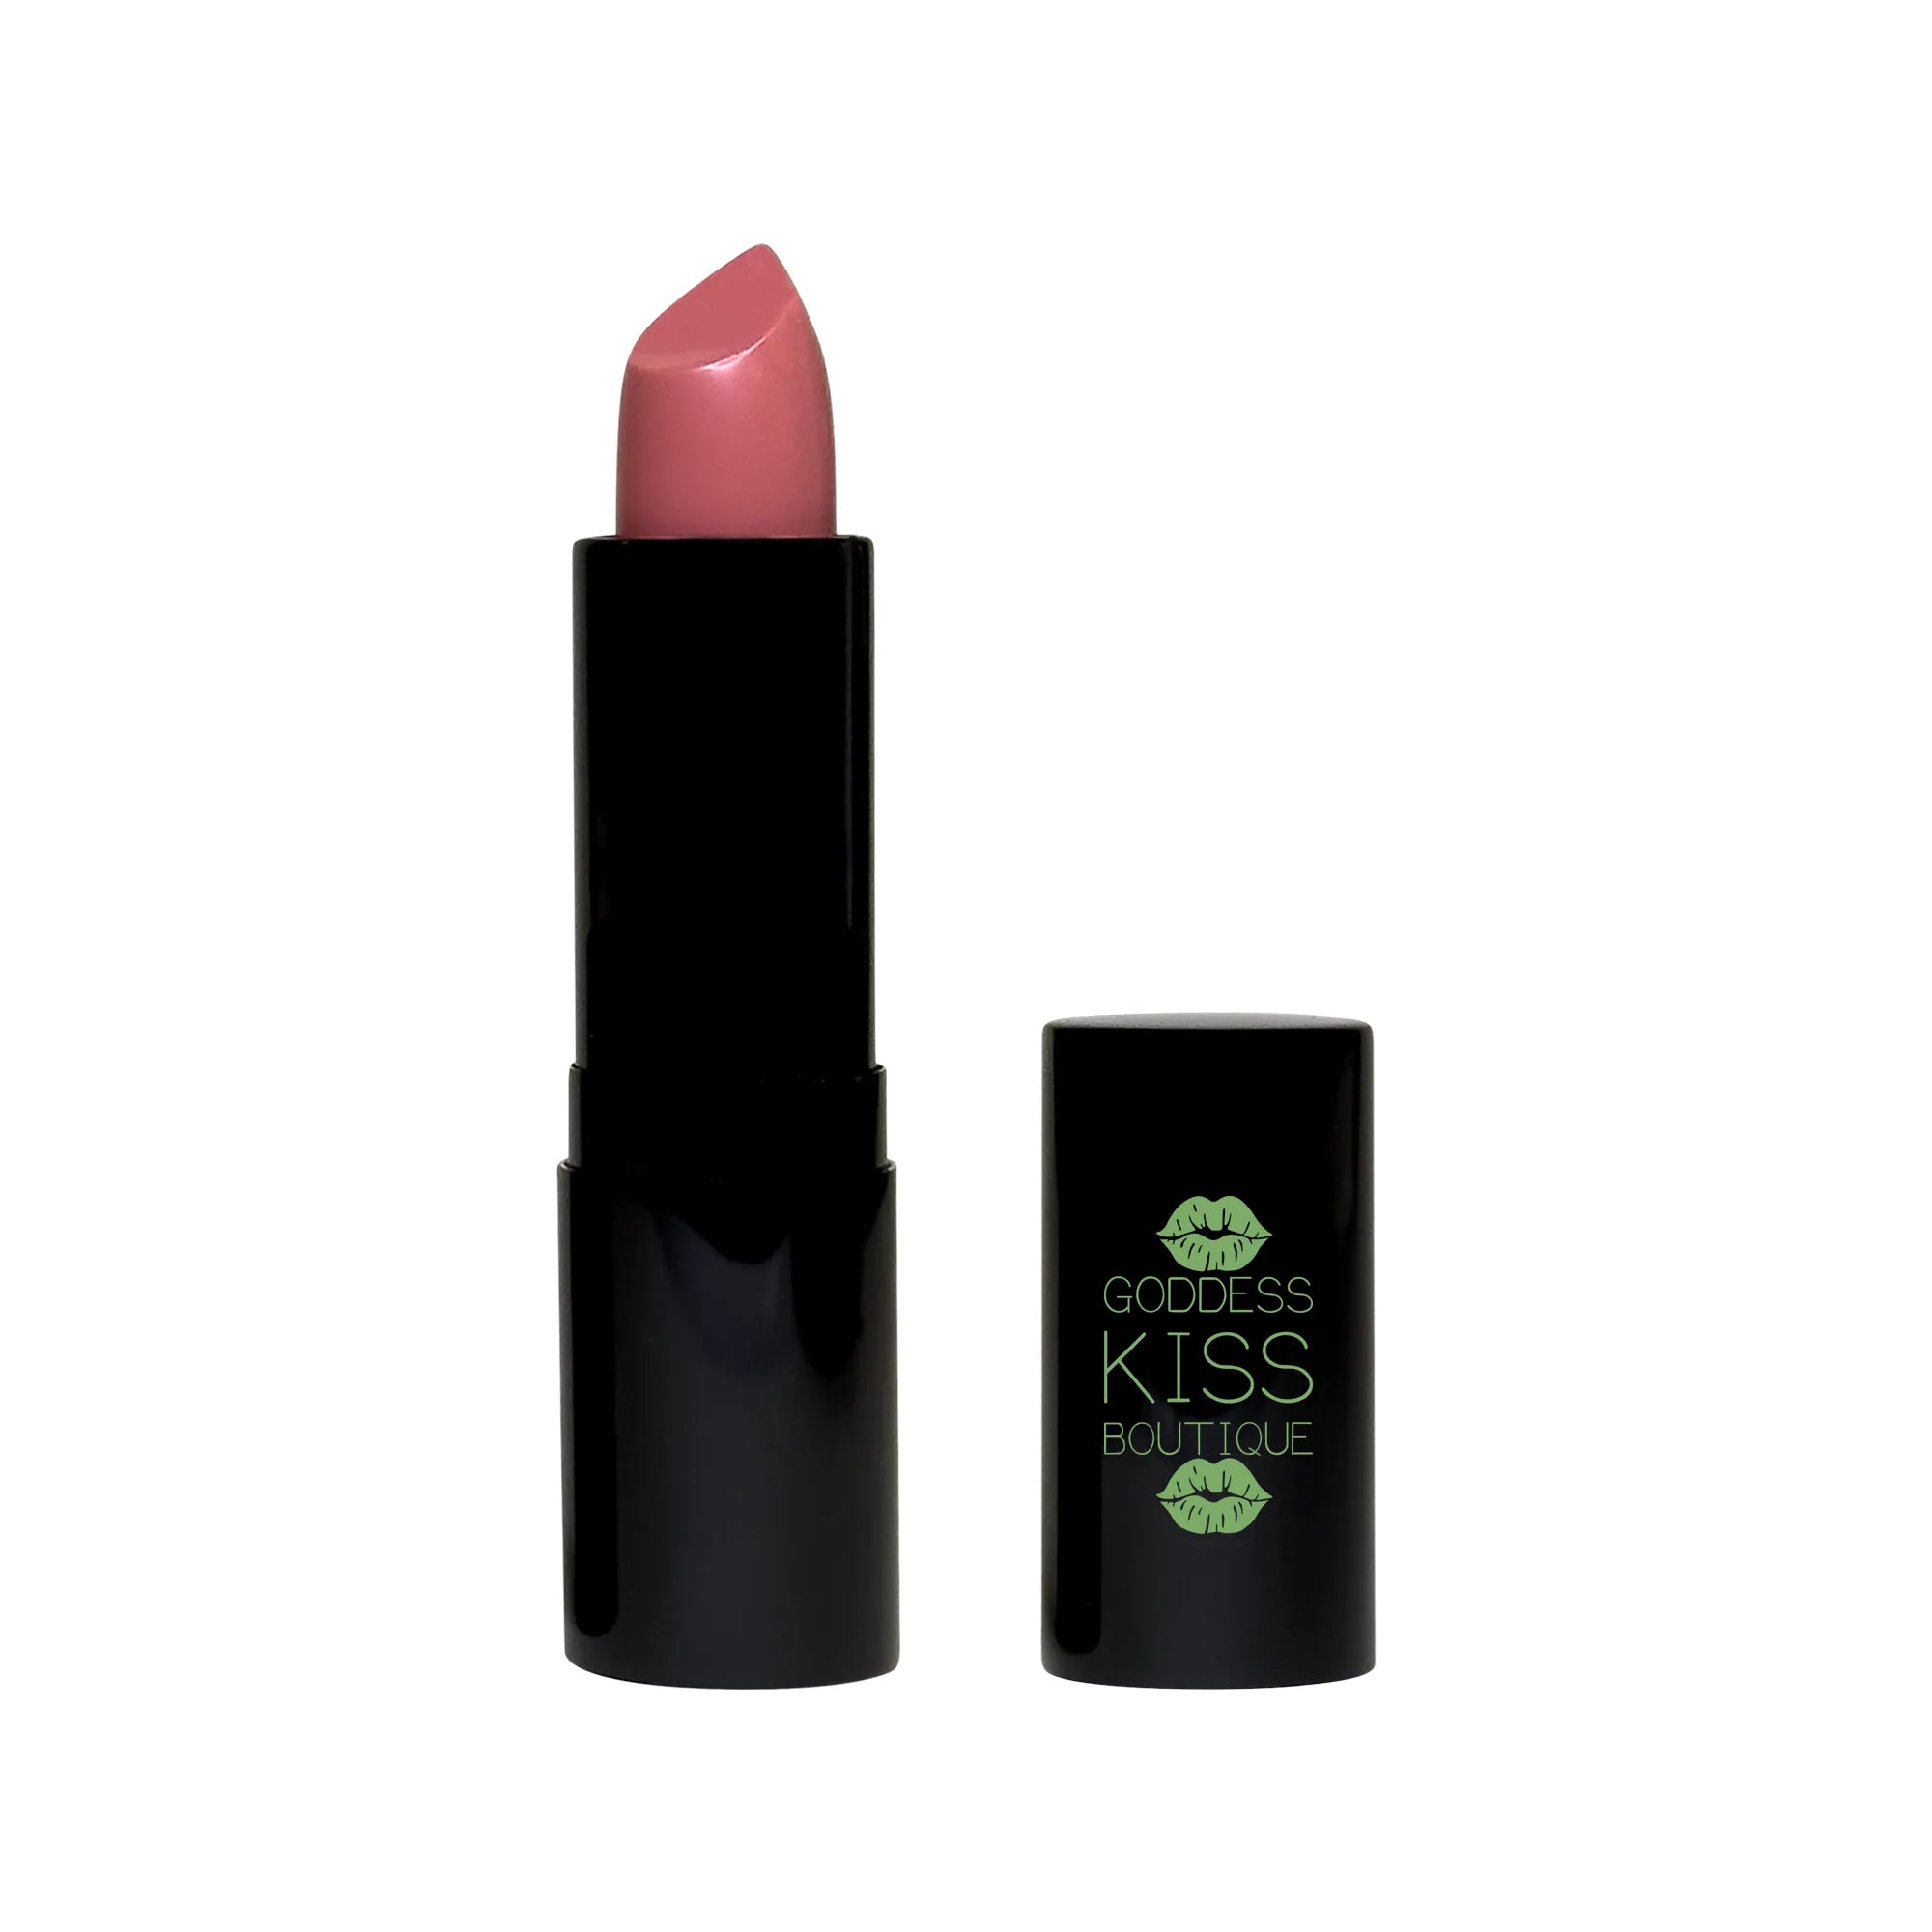 Luxurious Cream Lipstick - Darling Dahlia | Argan Oil Infused for Hydrated Lips, Vibrant Color